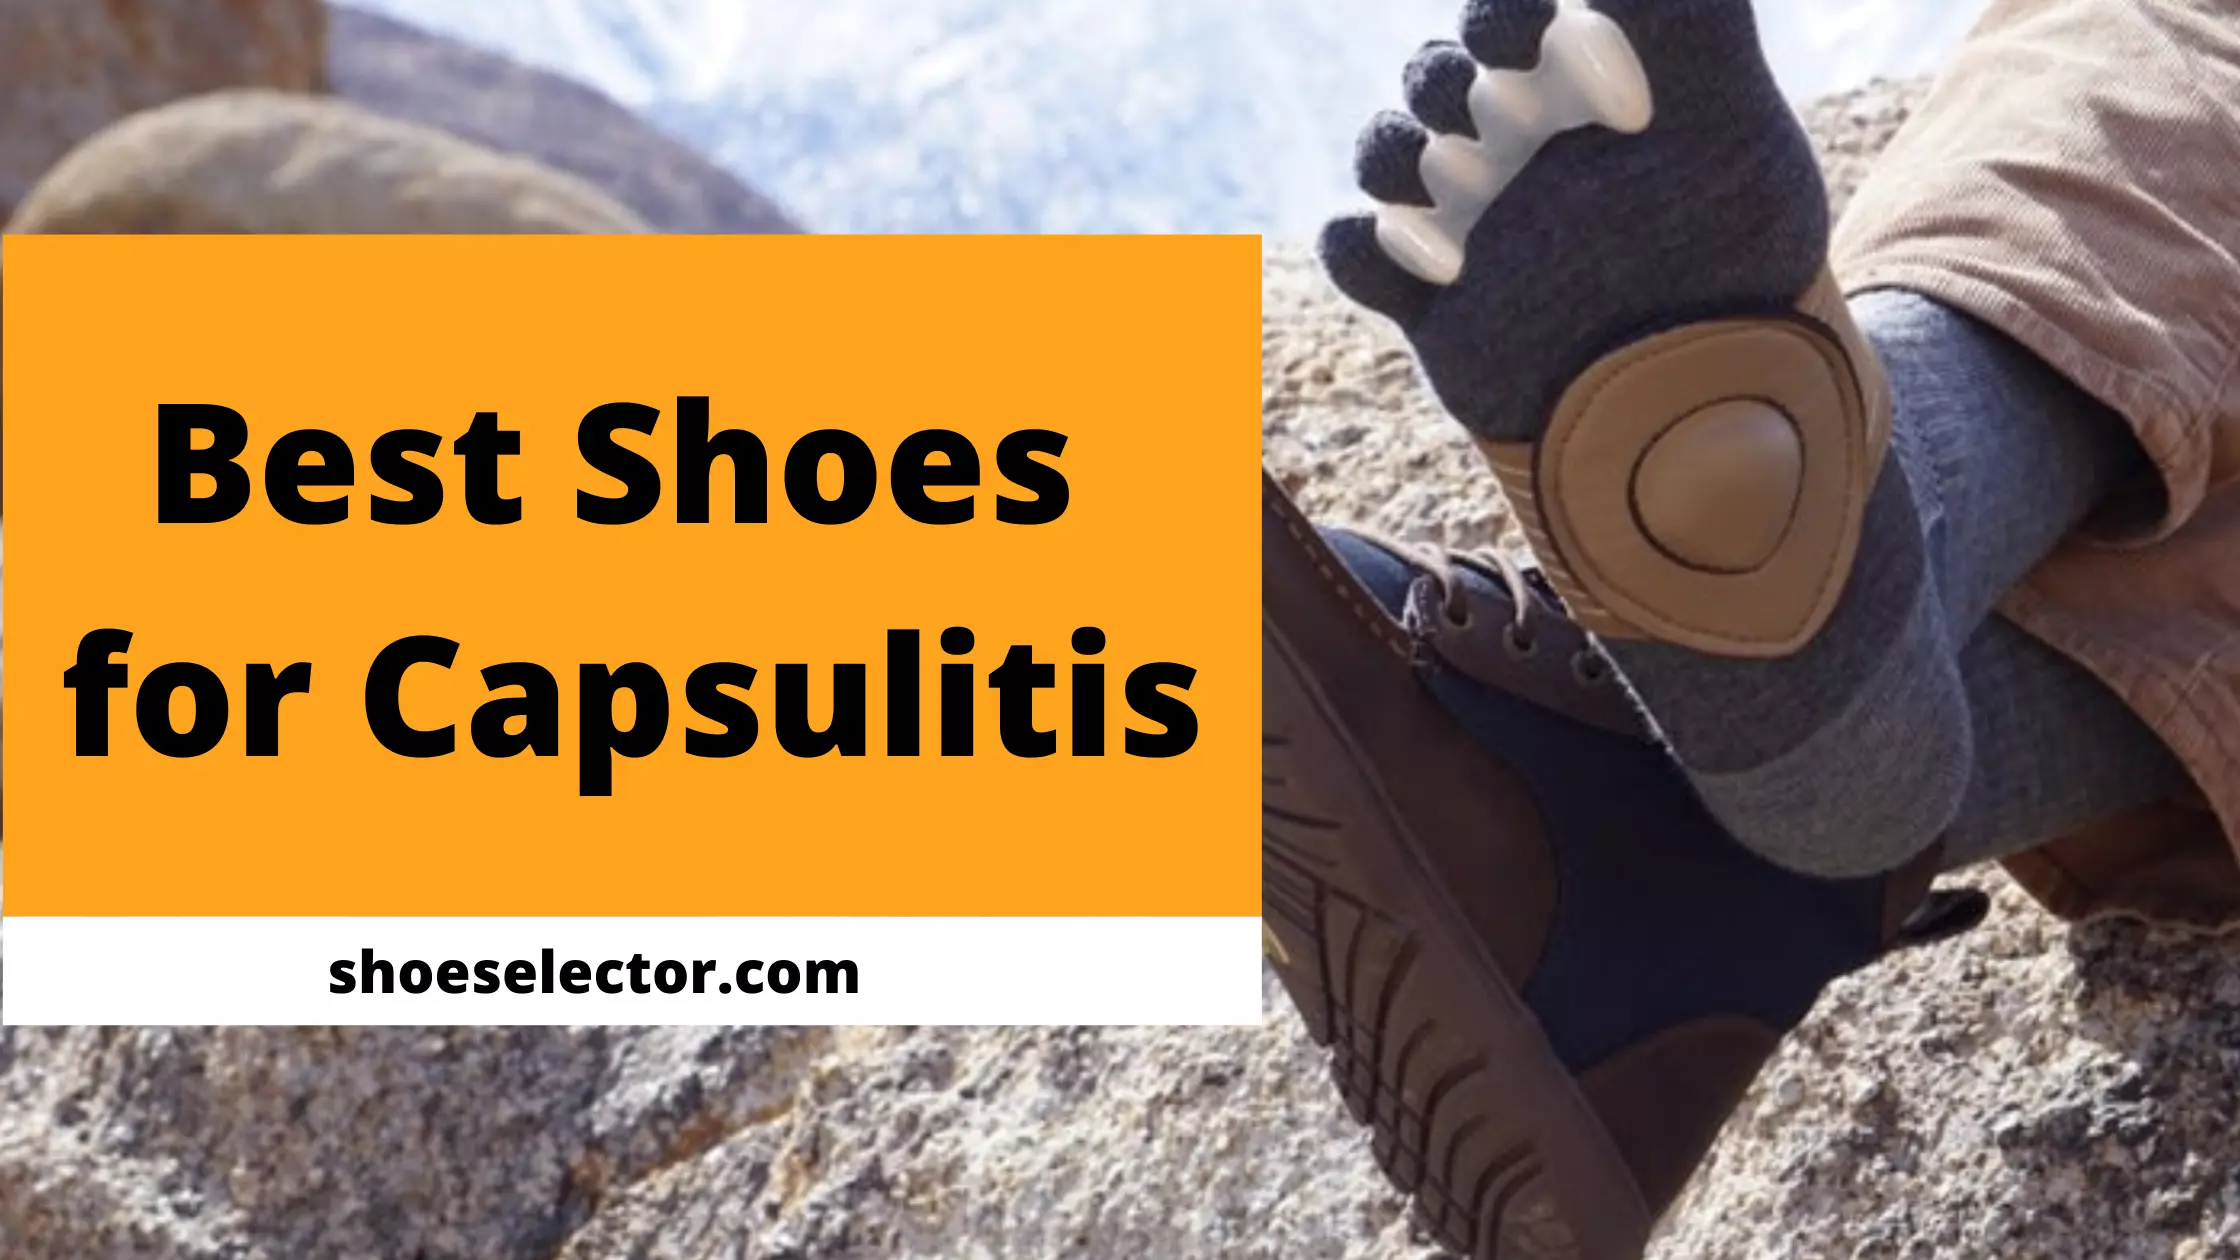 Best Shoes for Capsulitis - Recommended Products